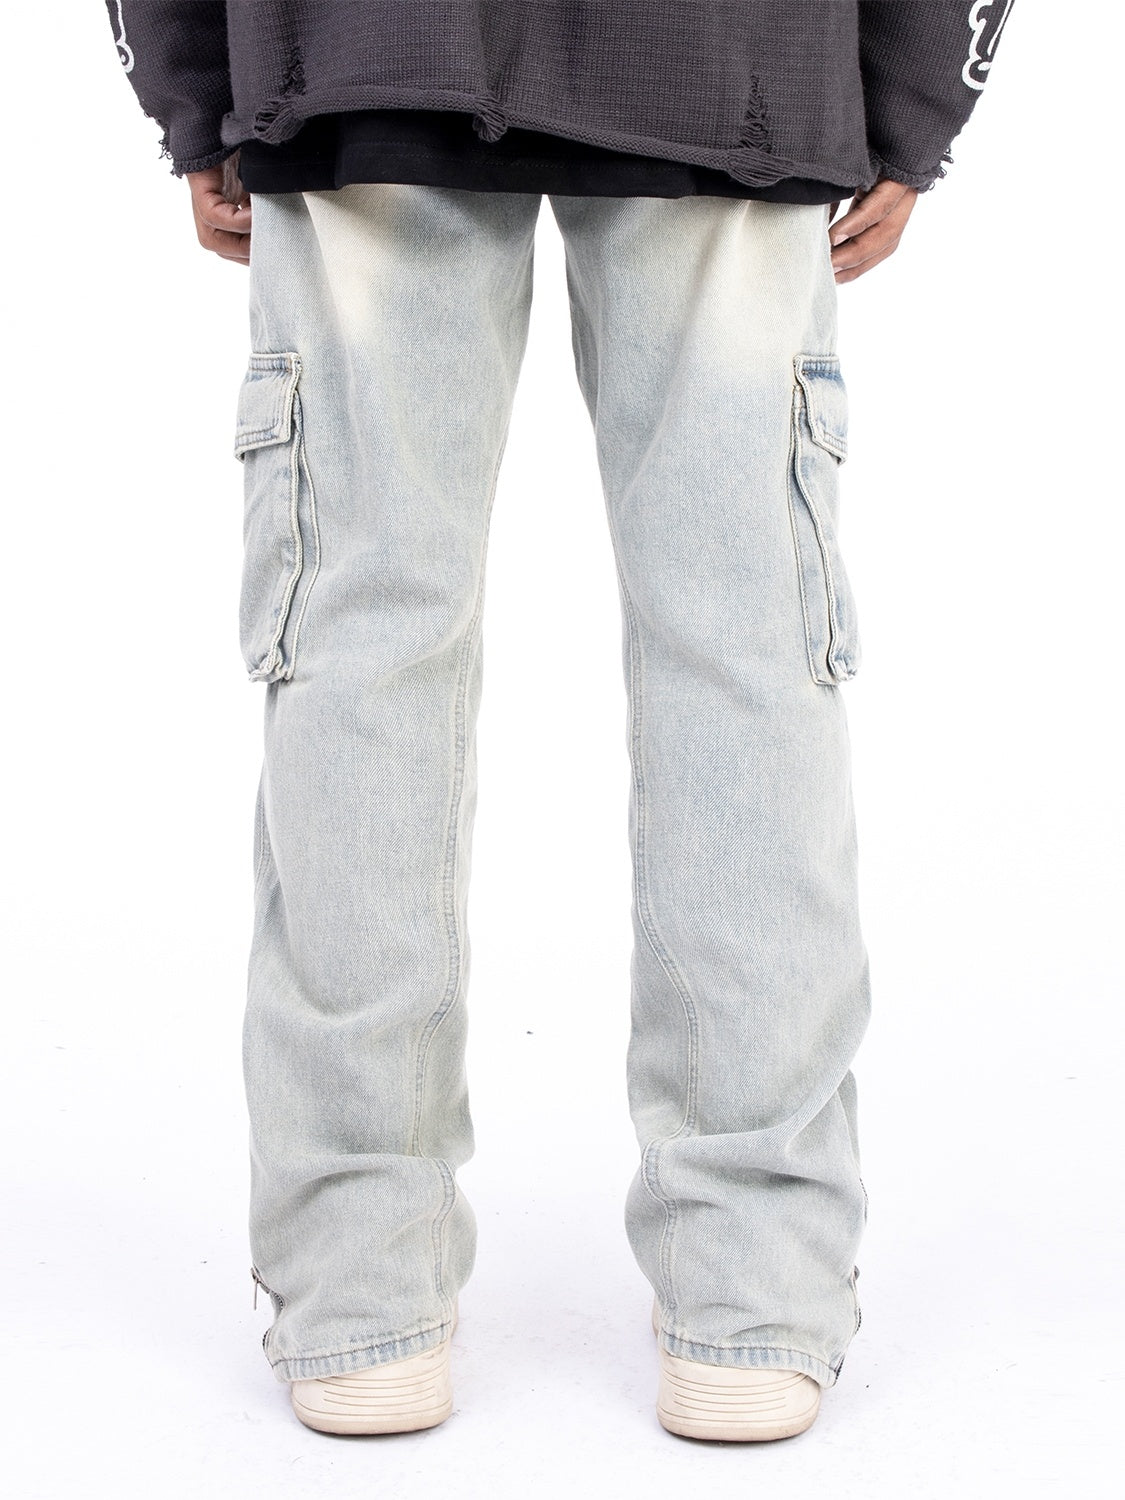 Men's Loose Jeans in Military Style